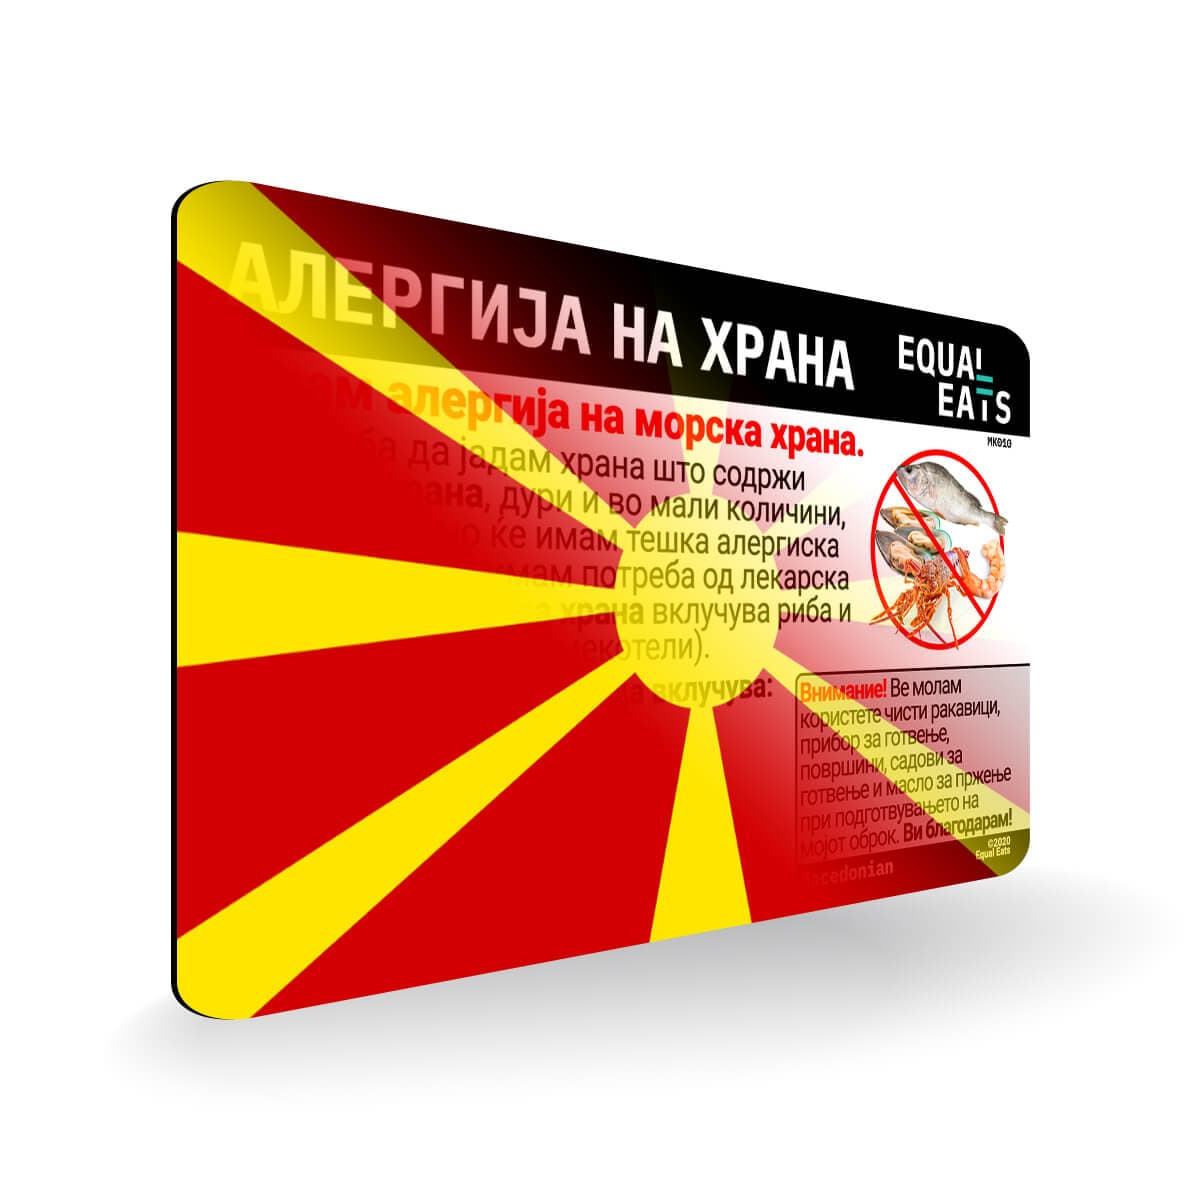 Seafood Allergy in Macedonian. Seafood Allergy Card for Macedonia